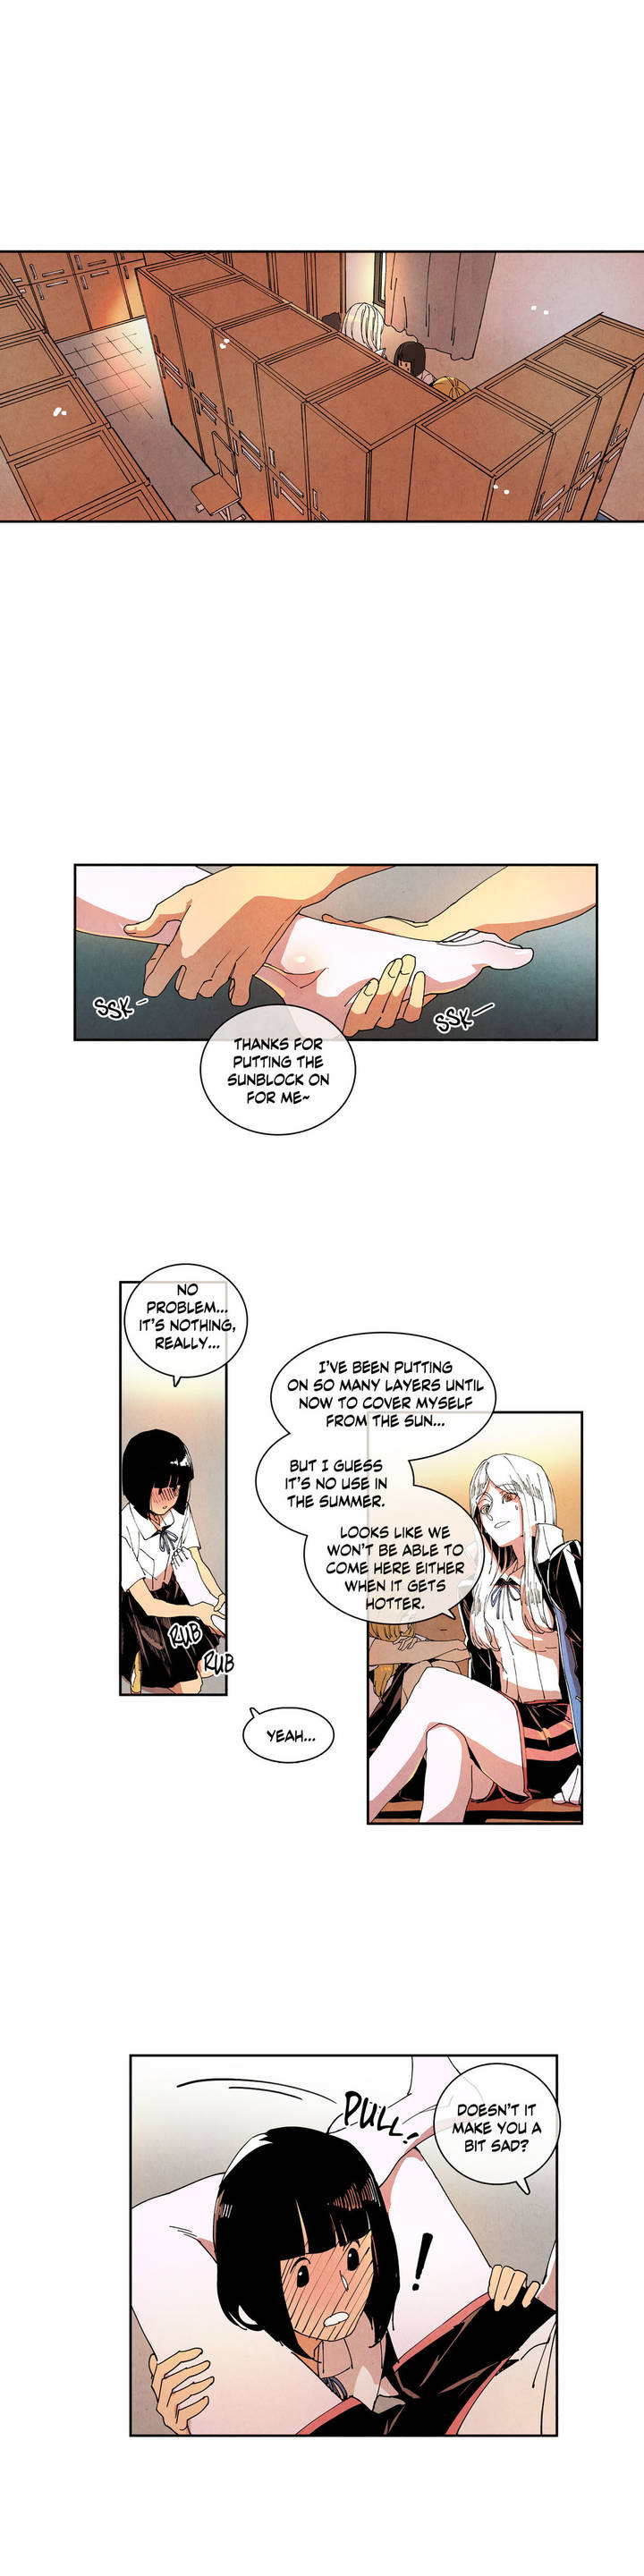 White Angels Have No Wings - Page 1